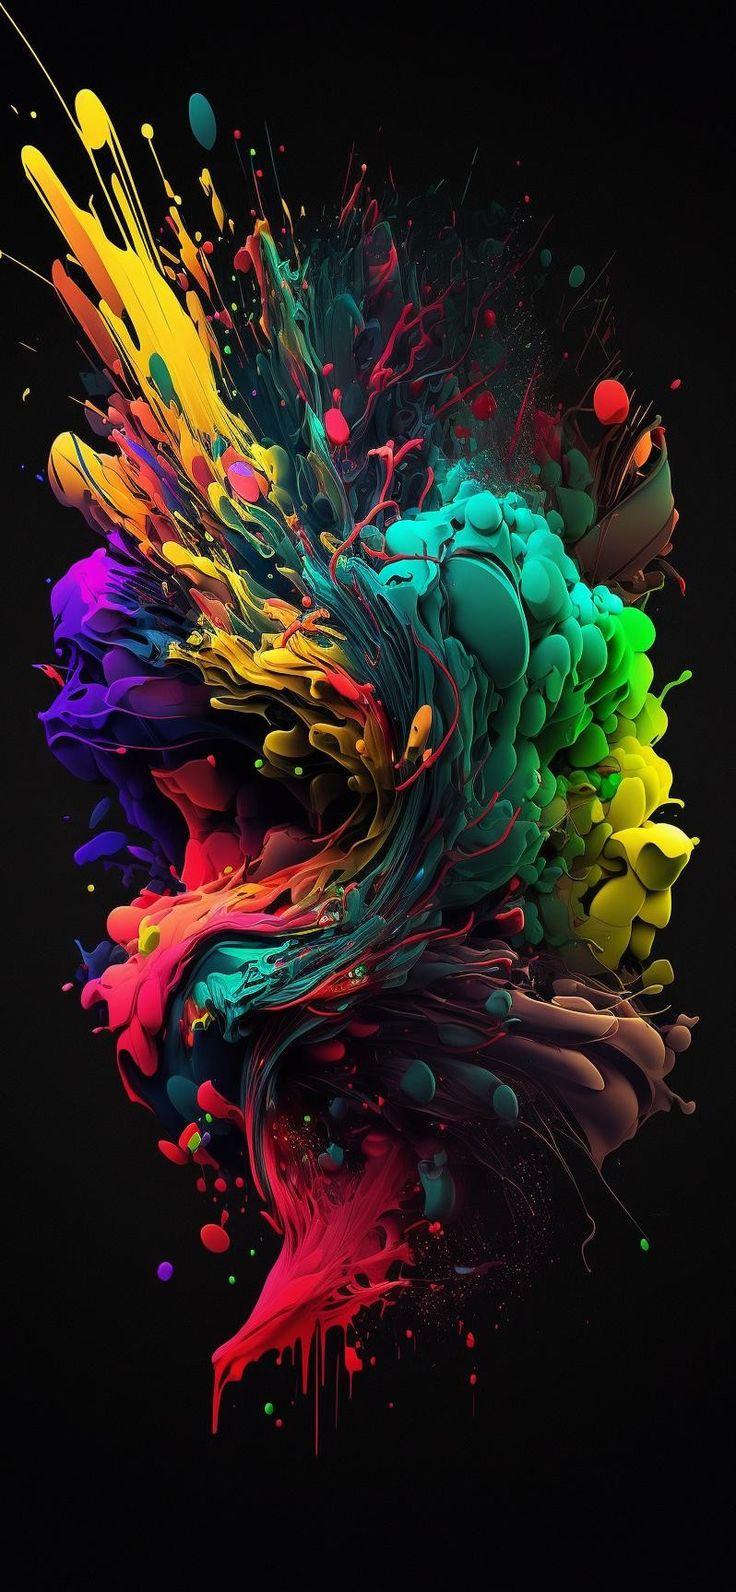 Colorful Eye Catching In iPhone Wallpaper Stills